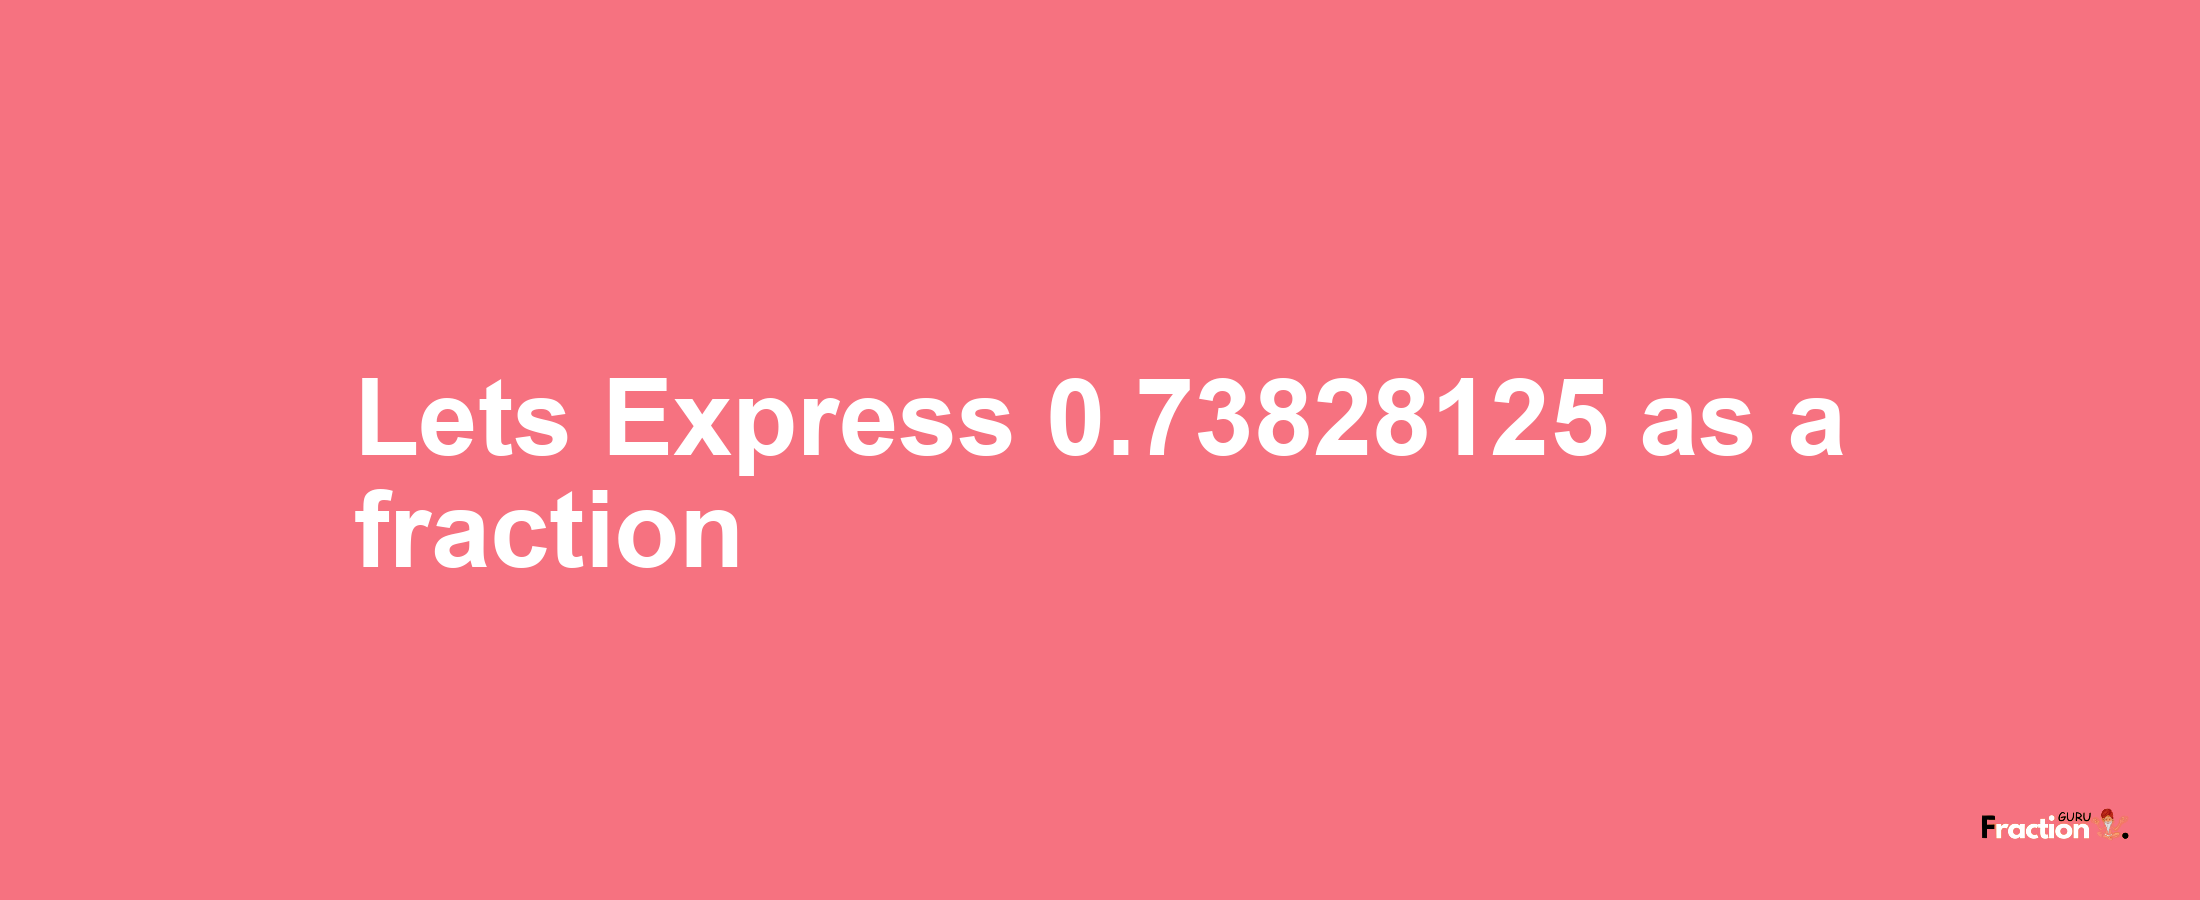 Lets Express 0.73828125 as afraction